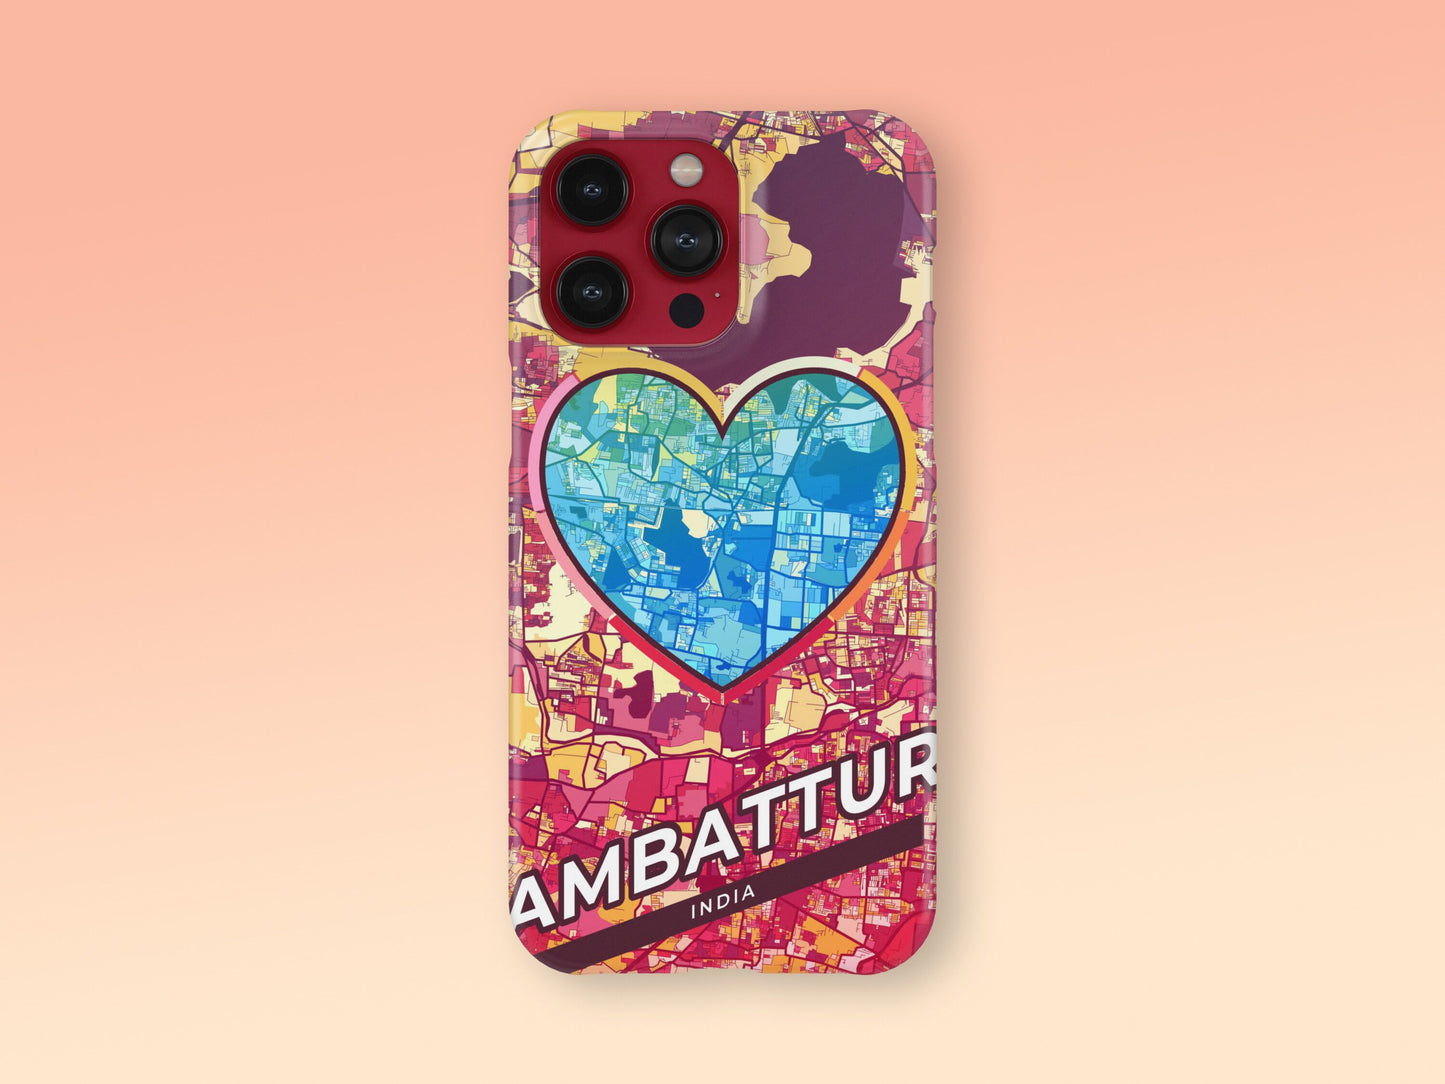 Ambattur India slim phone case with colorful icon. Birthday, wedding or housewarming gift. Couple match cases. 2